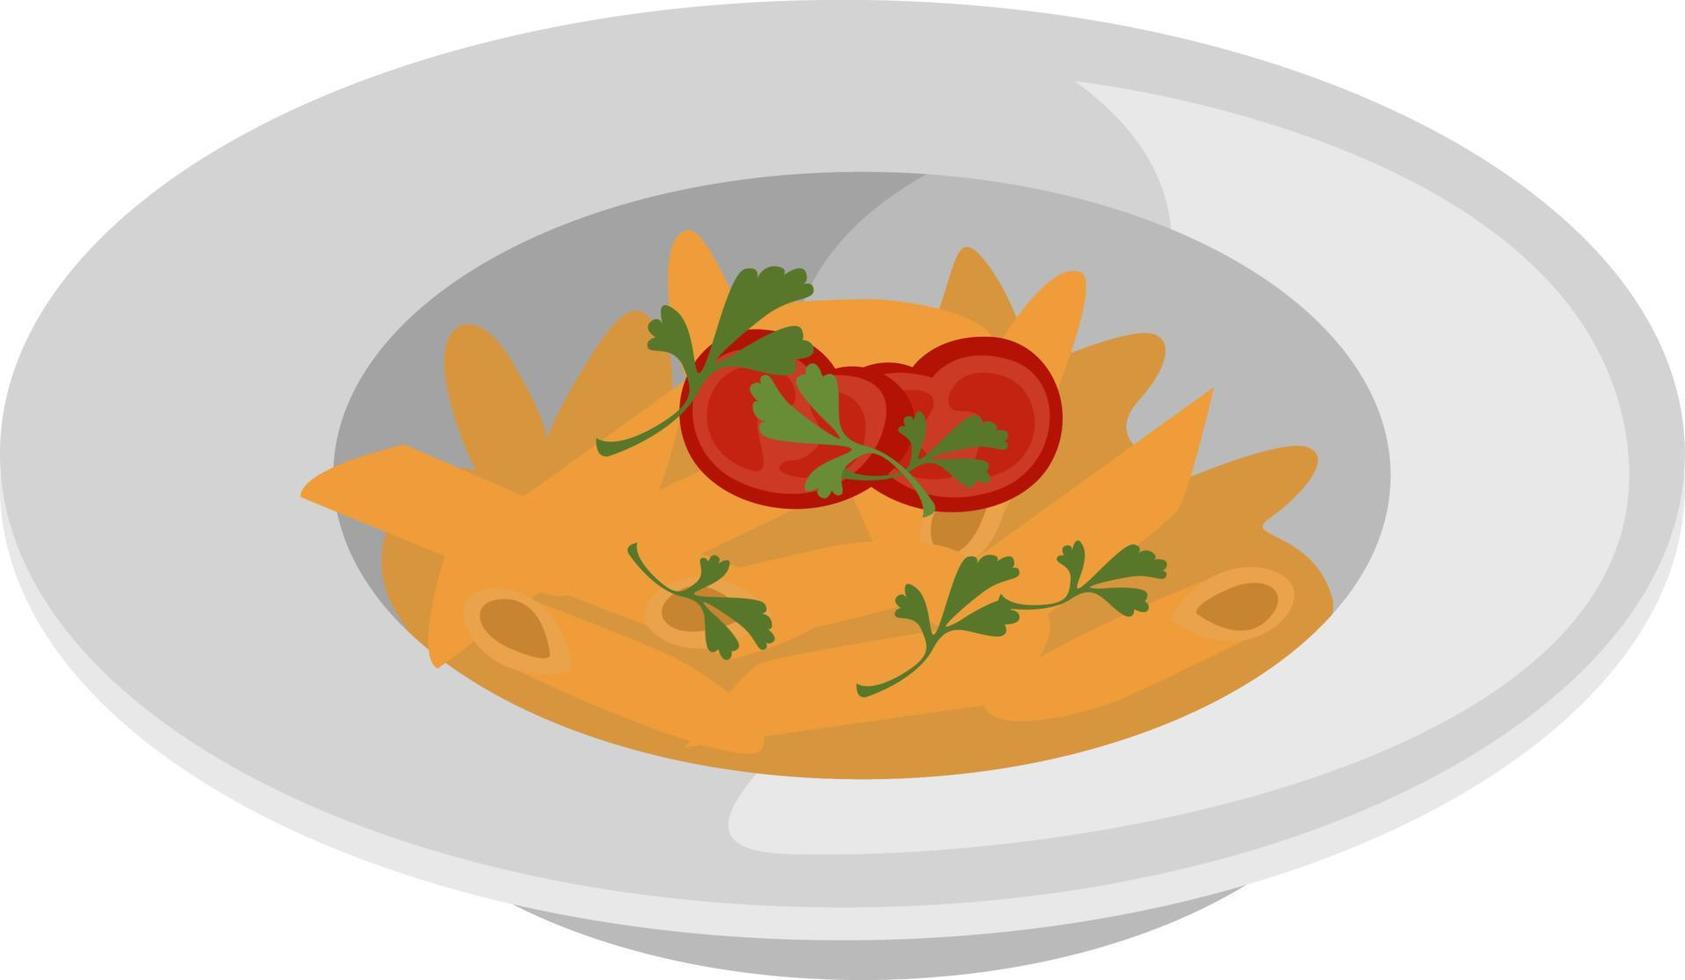 Penne in plate, illustration, vector on white background